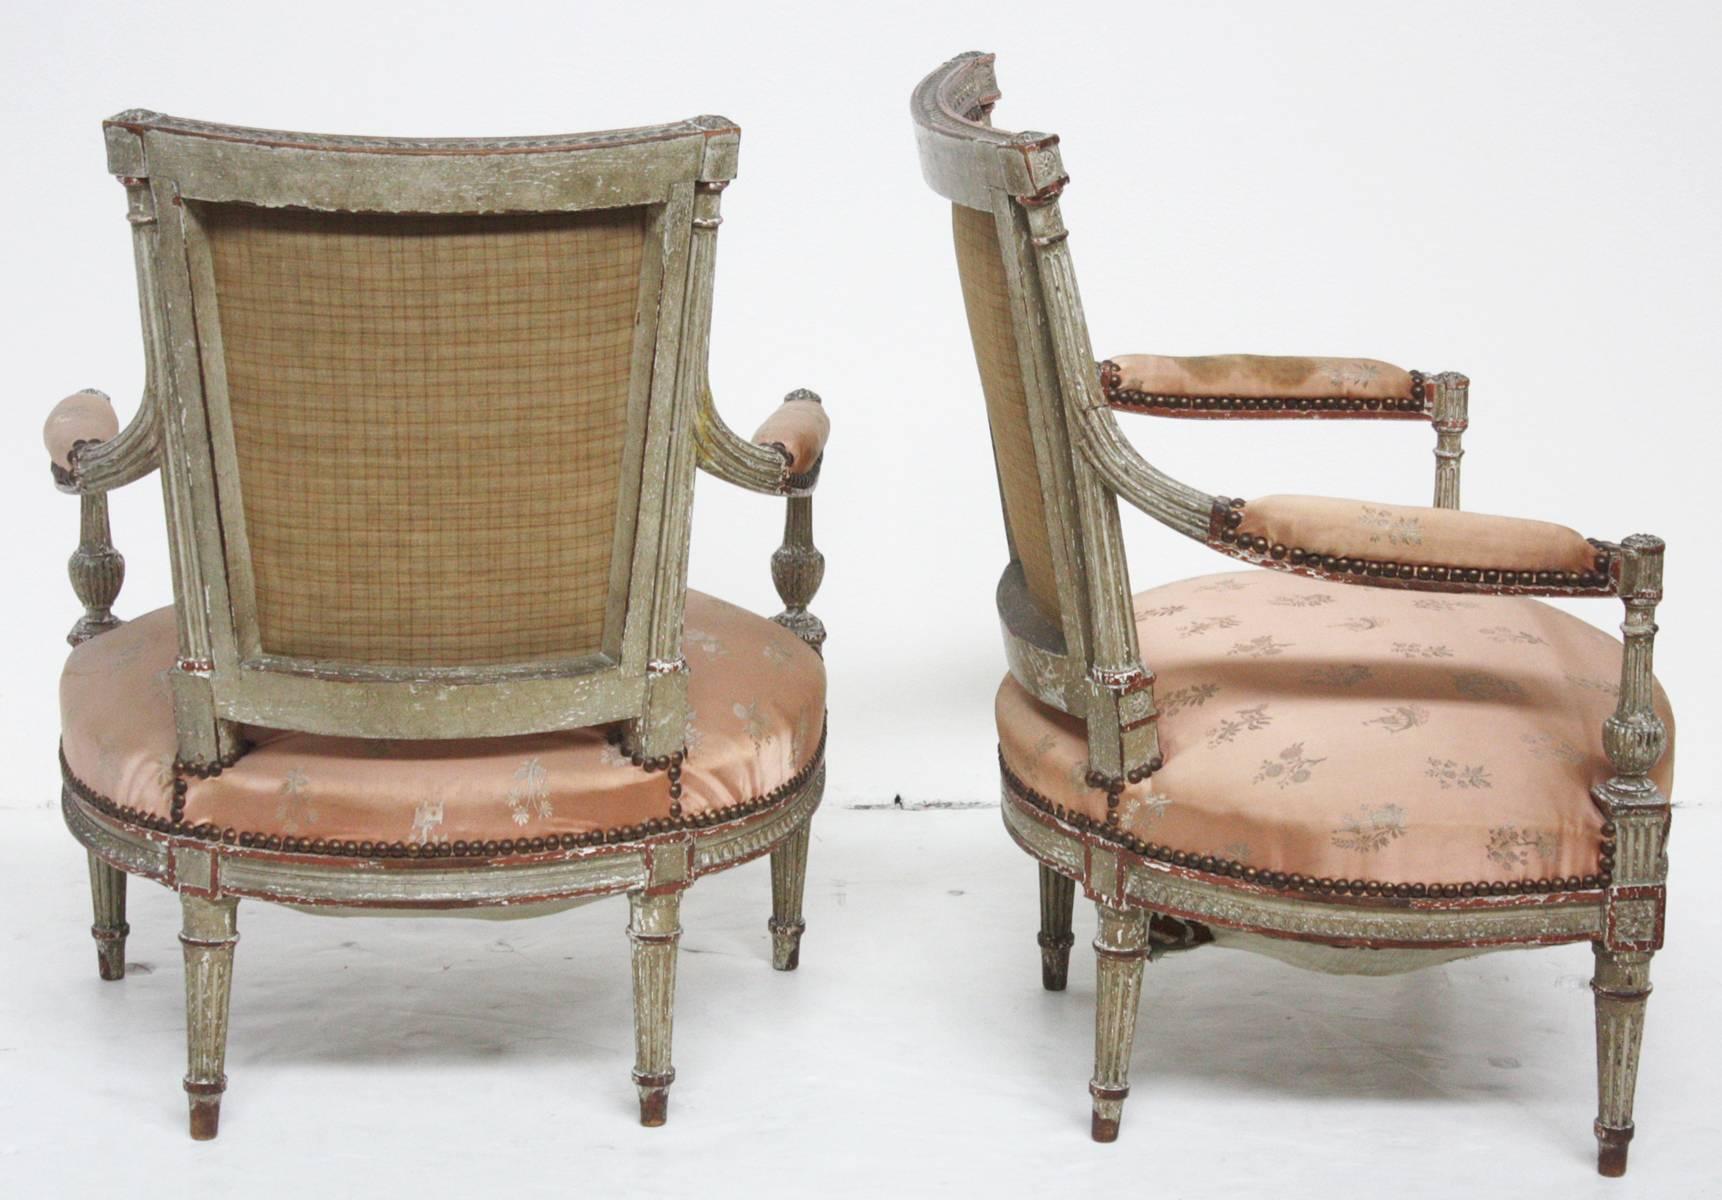 A pair of Louis XVI child's fauteuils, paint and parcel-gilt frames, pale peach silk Chinoiserie upholstery fabric decorated with sprigs of flowers, potted trees, sailing ships and small Chinese towers, the chair's seats are sprung and the seats